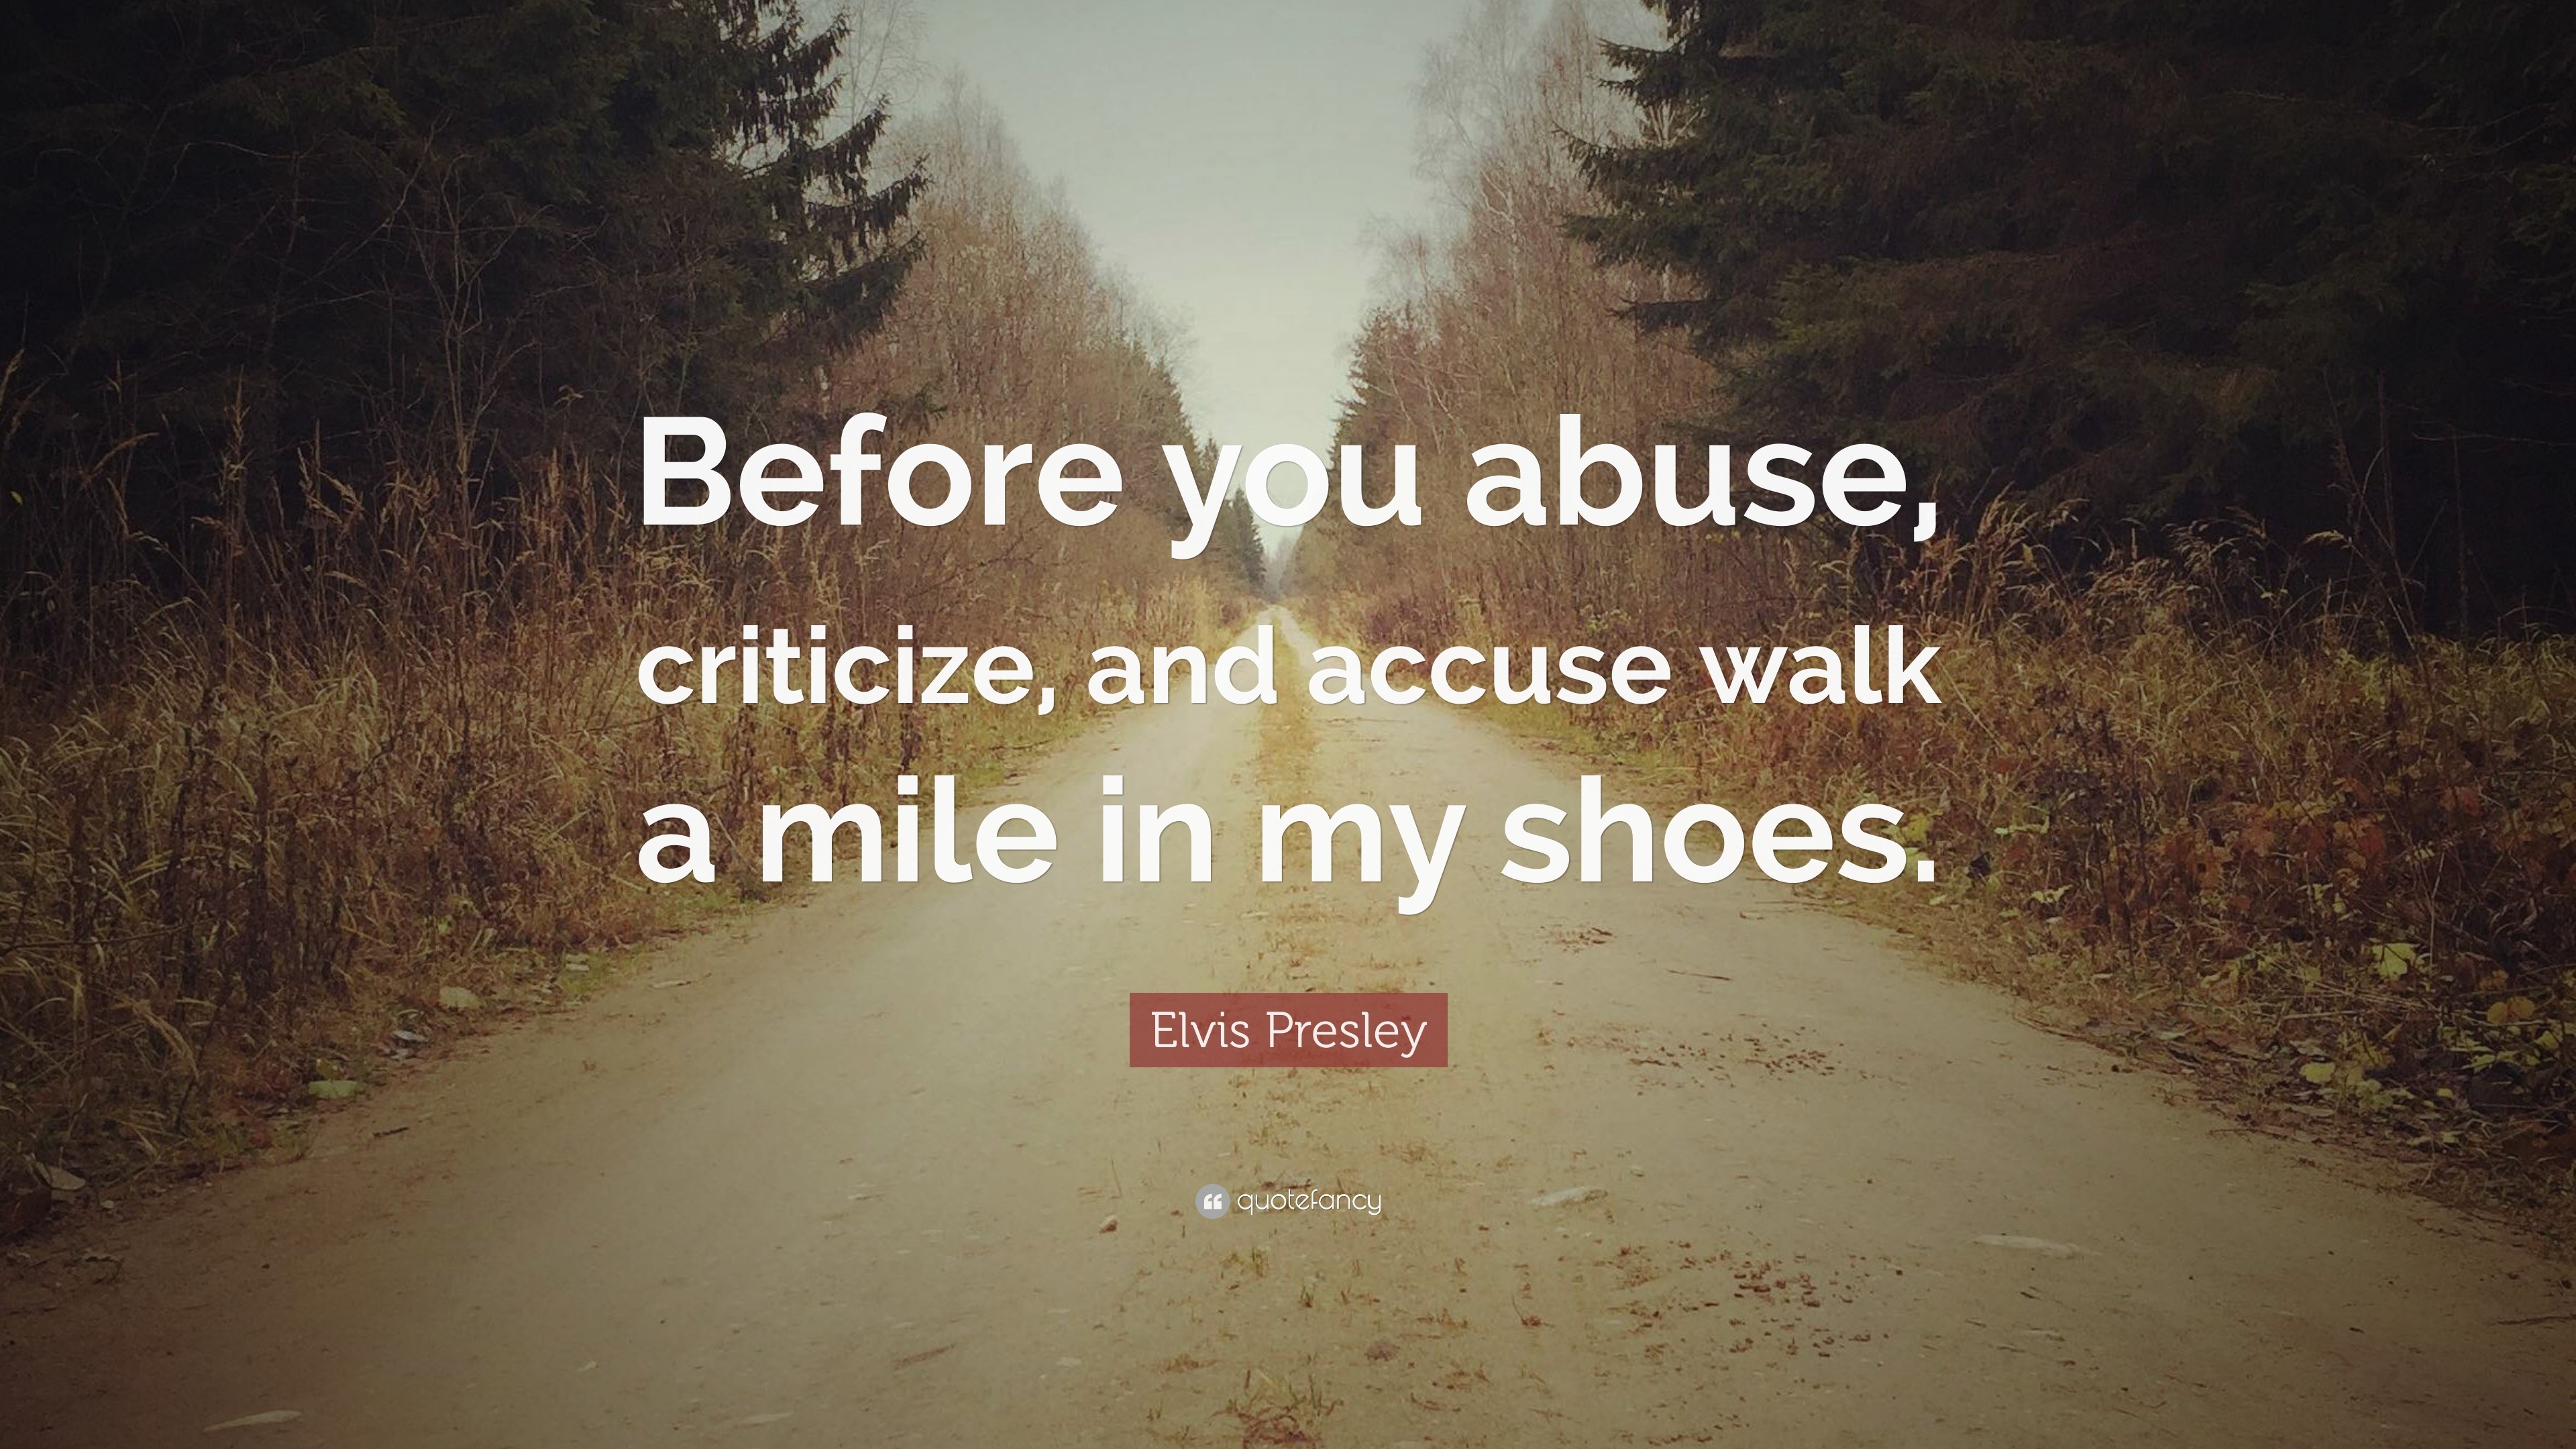 i want to walk a mile in your shoes